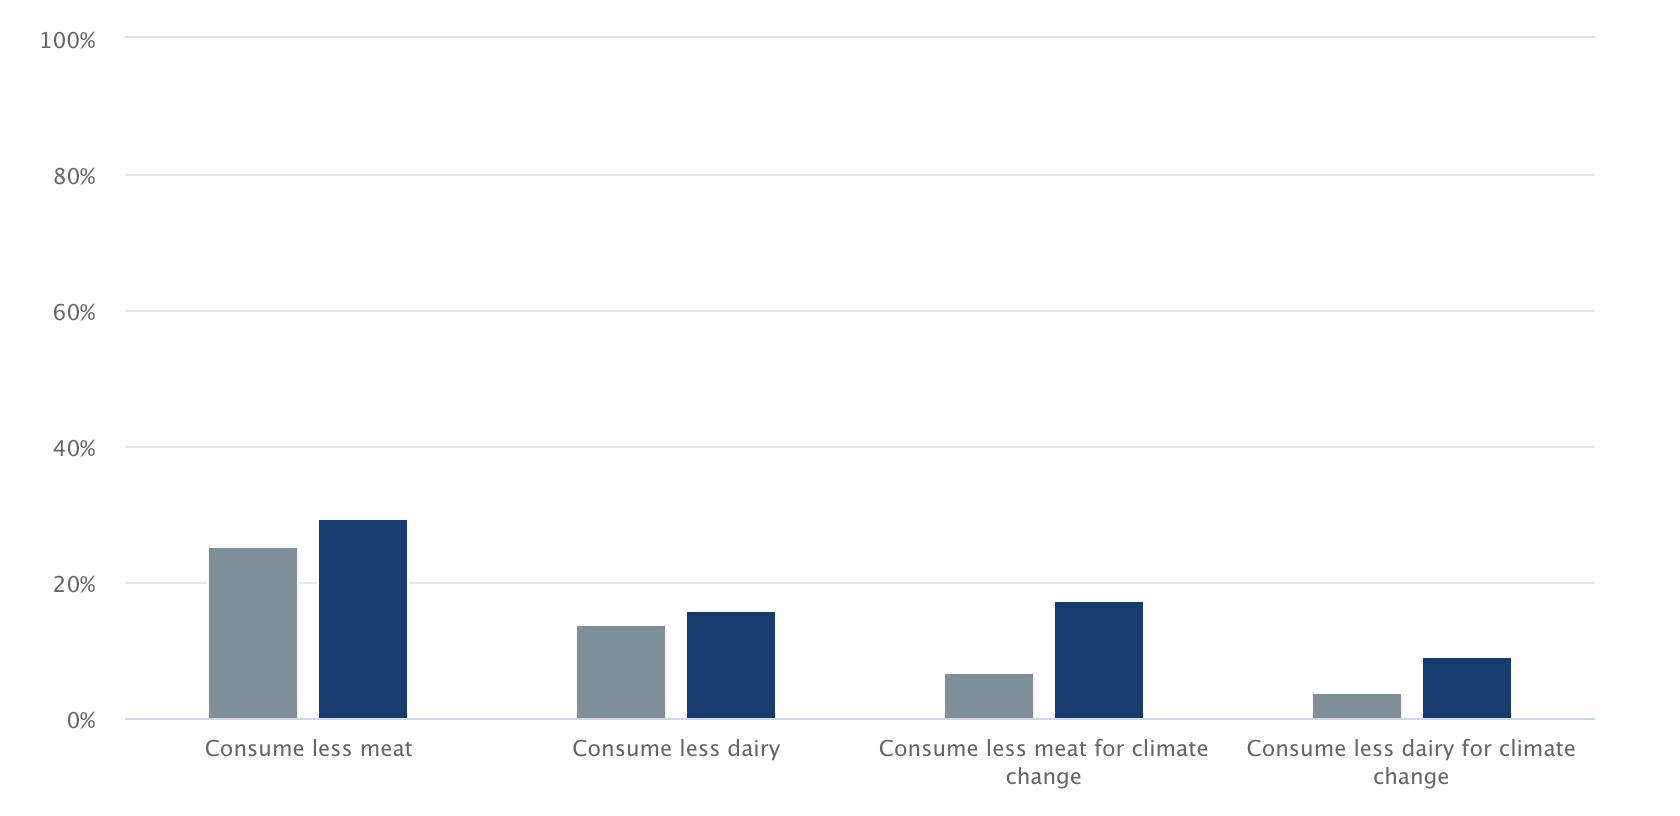 Do you consume less meat or dairy/consume less meat or dairy for climate change?